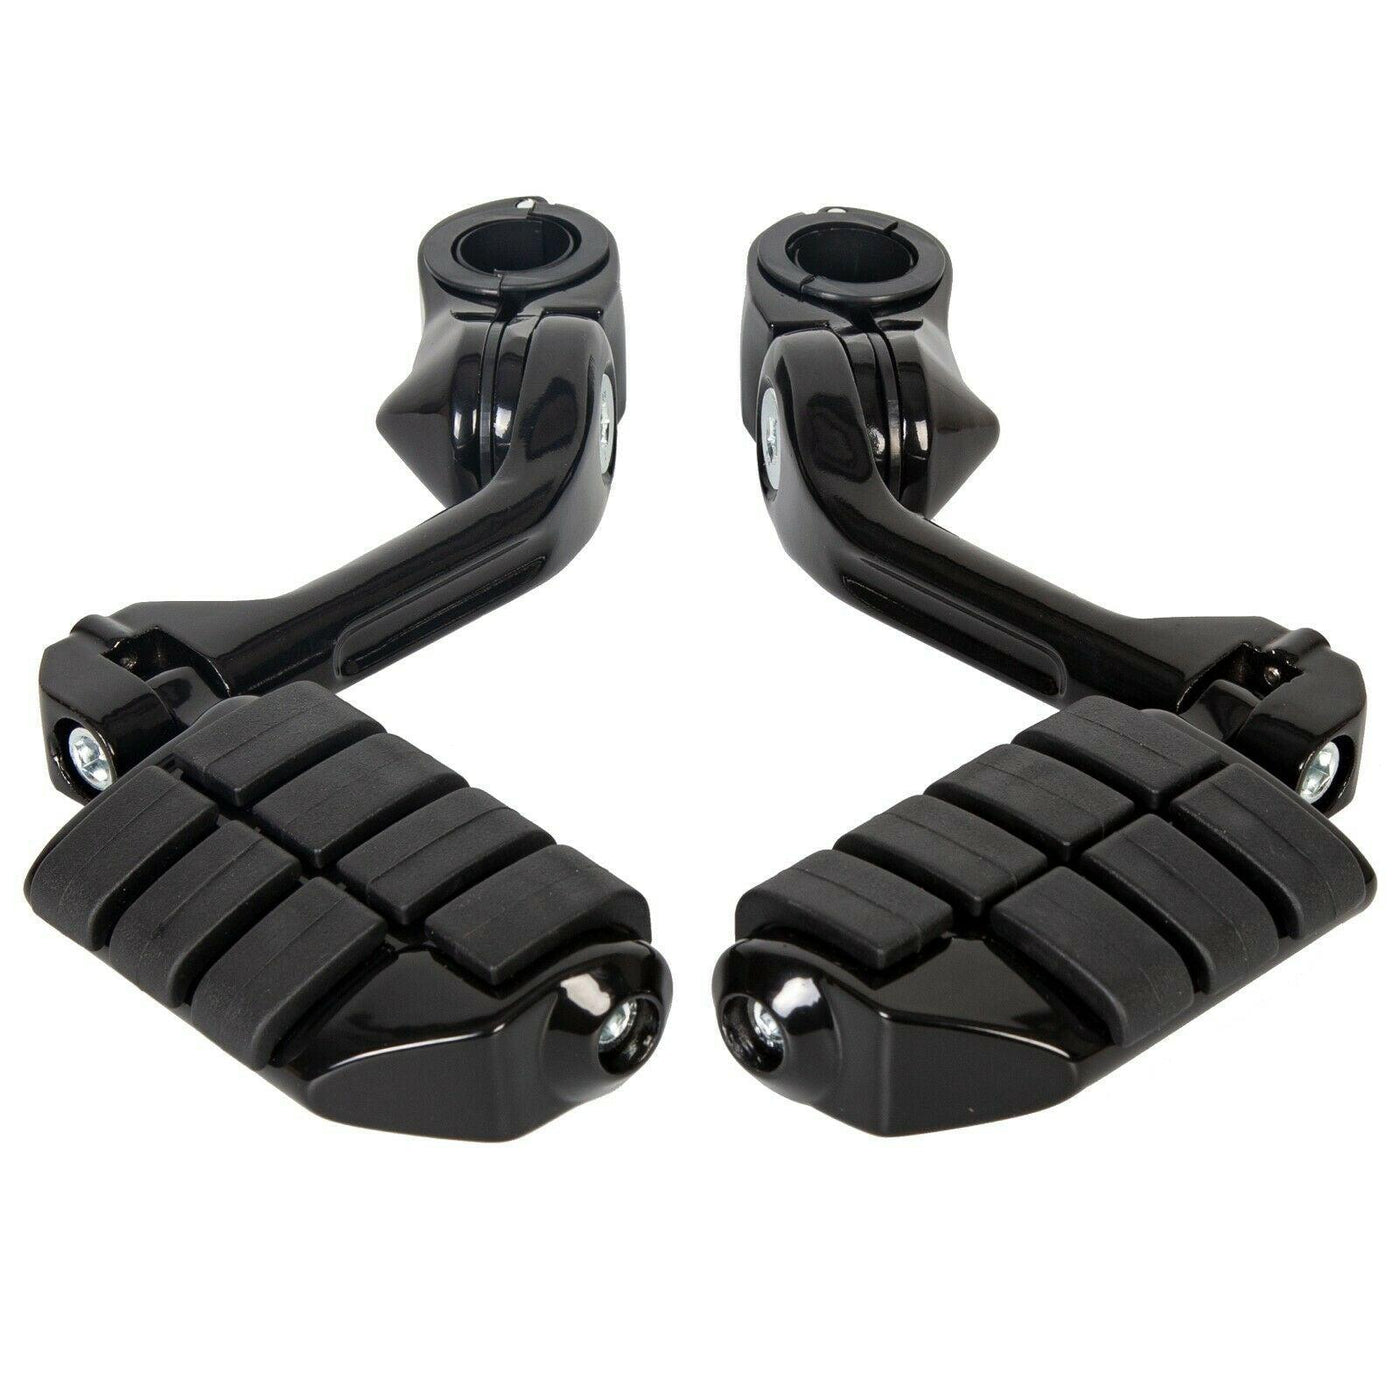 BLK Motorcycle Long Angled Foot Highway Pegs For Harley 1-1/4" Engine Guard - Moto Life Products